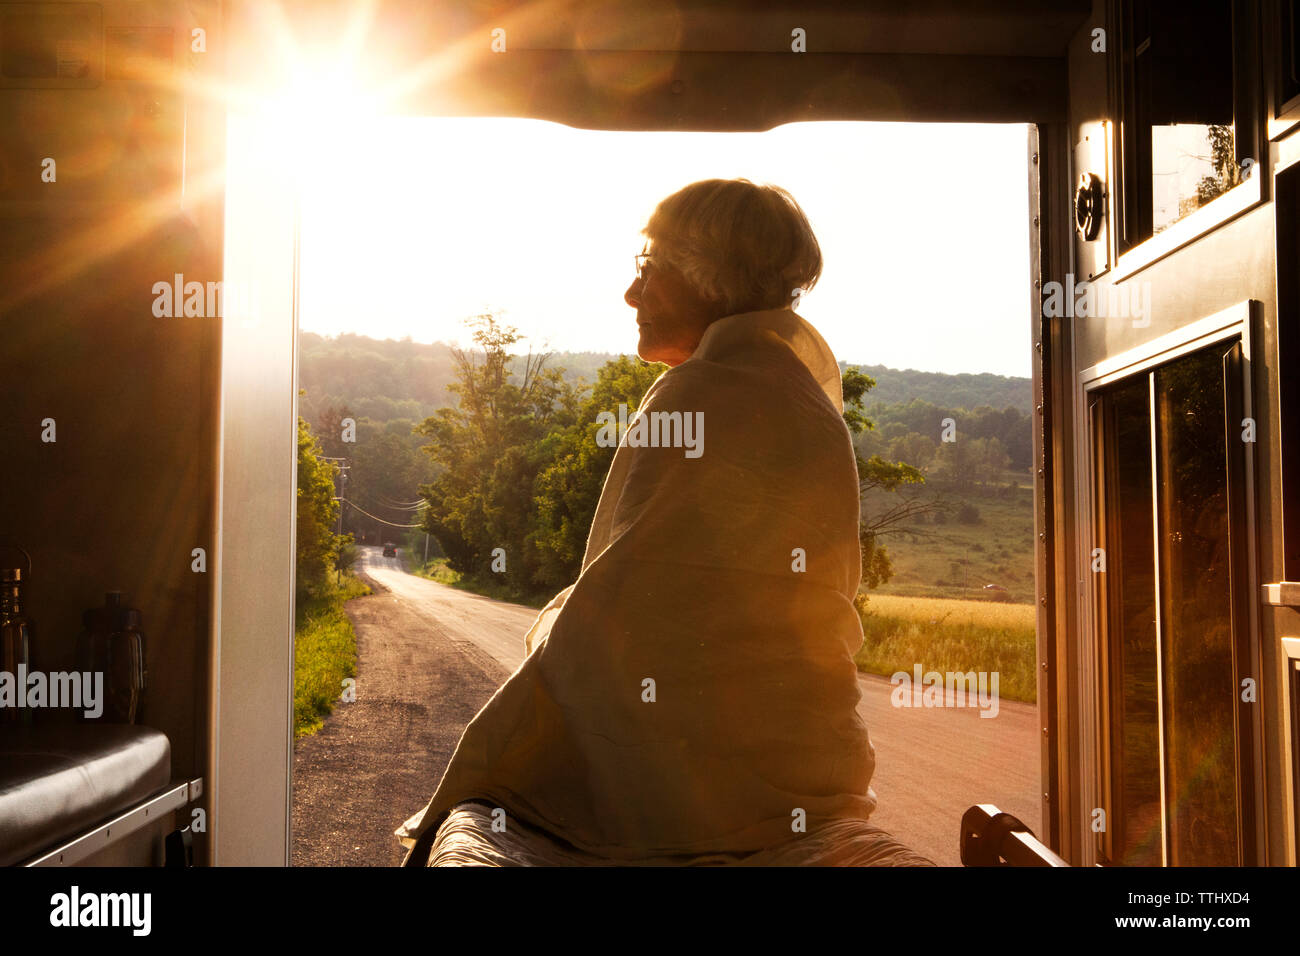 Woman wrapped in blanket sitting in ambulance during sunset Stock Photo